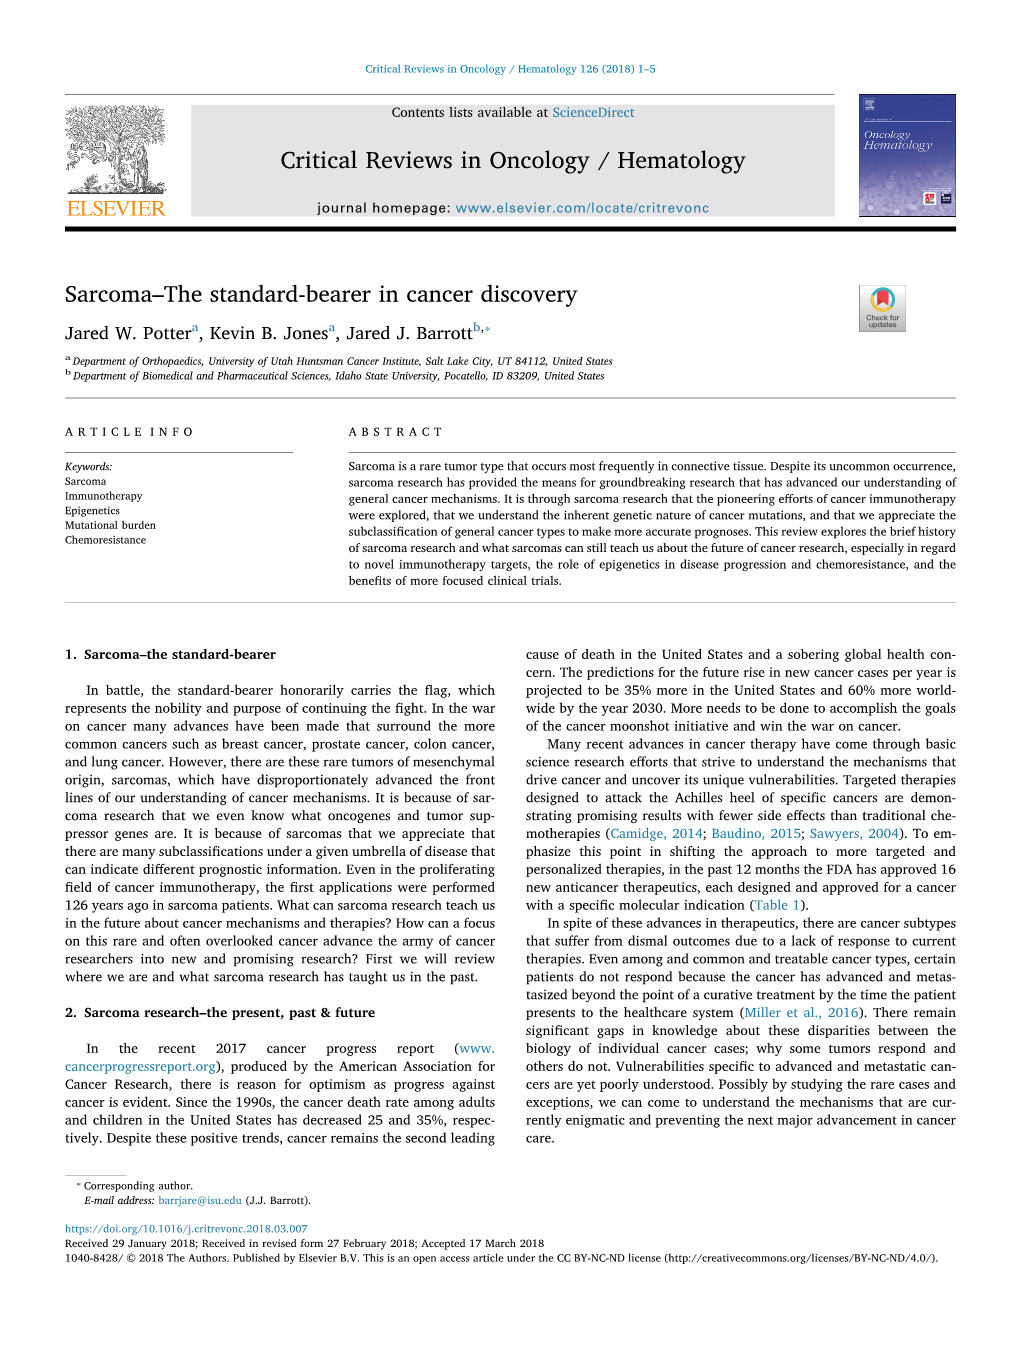 Sarcoma–The Standard-Bearer in Cancer Discovery T ⁎ Jared W